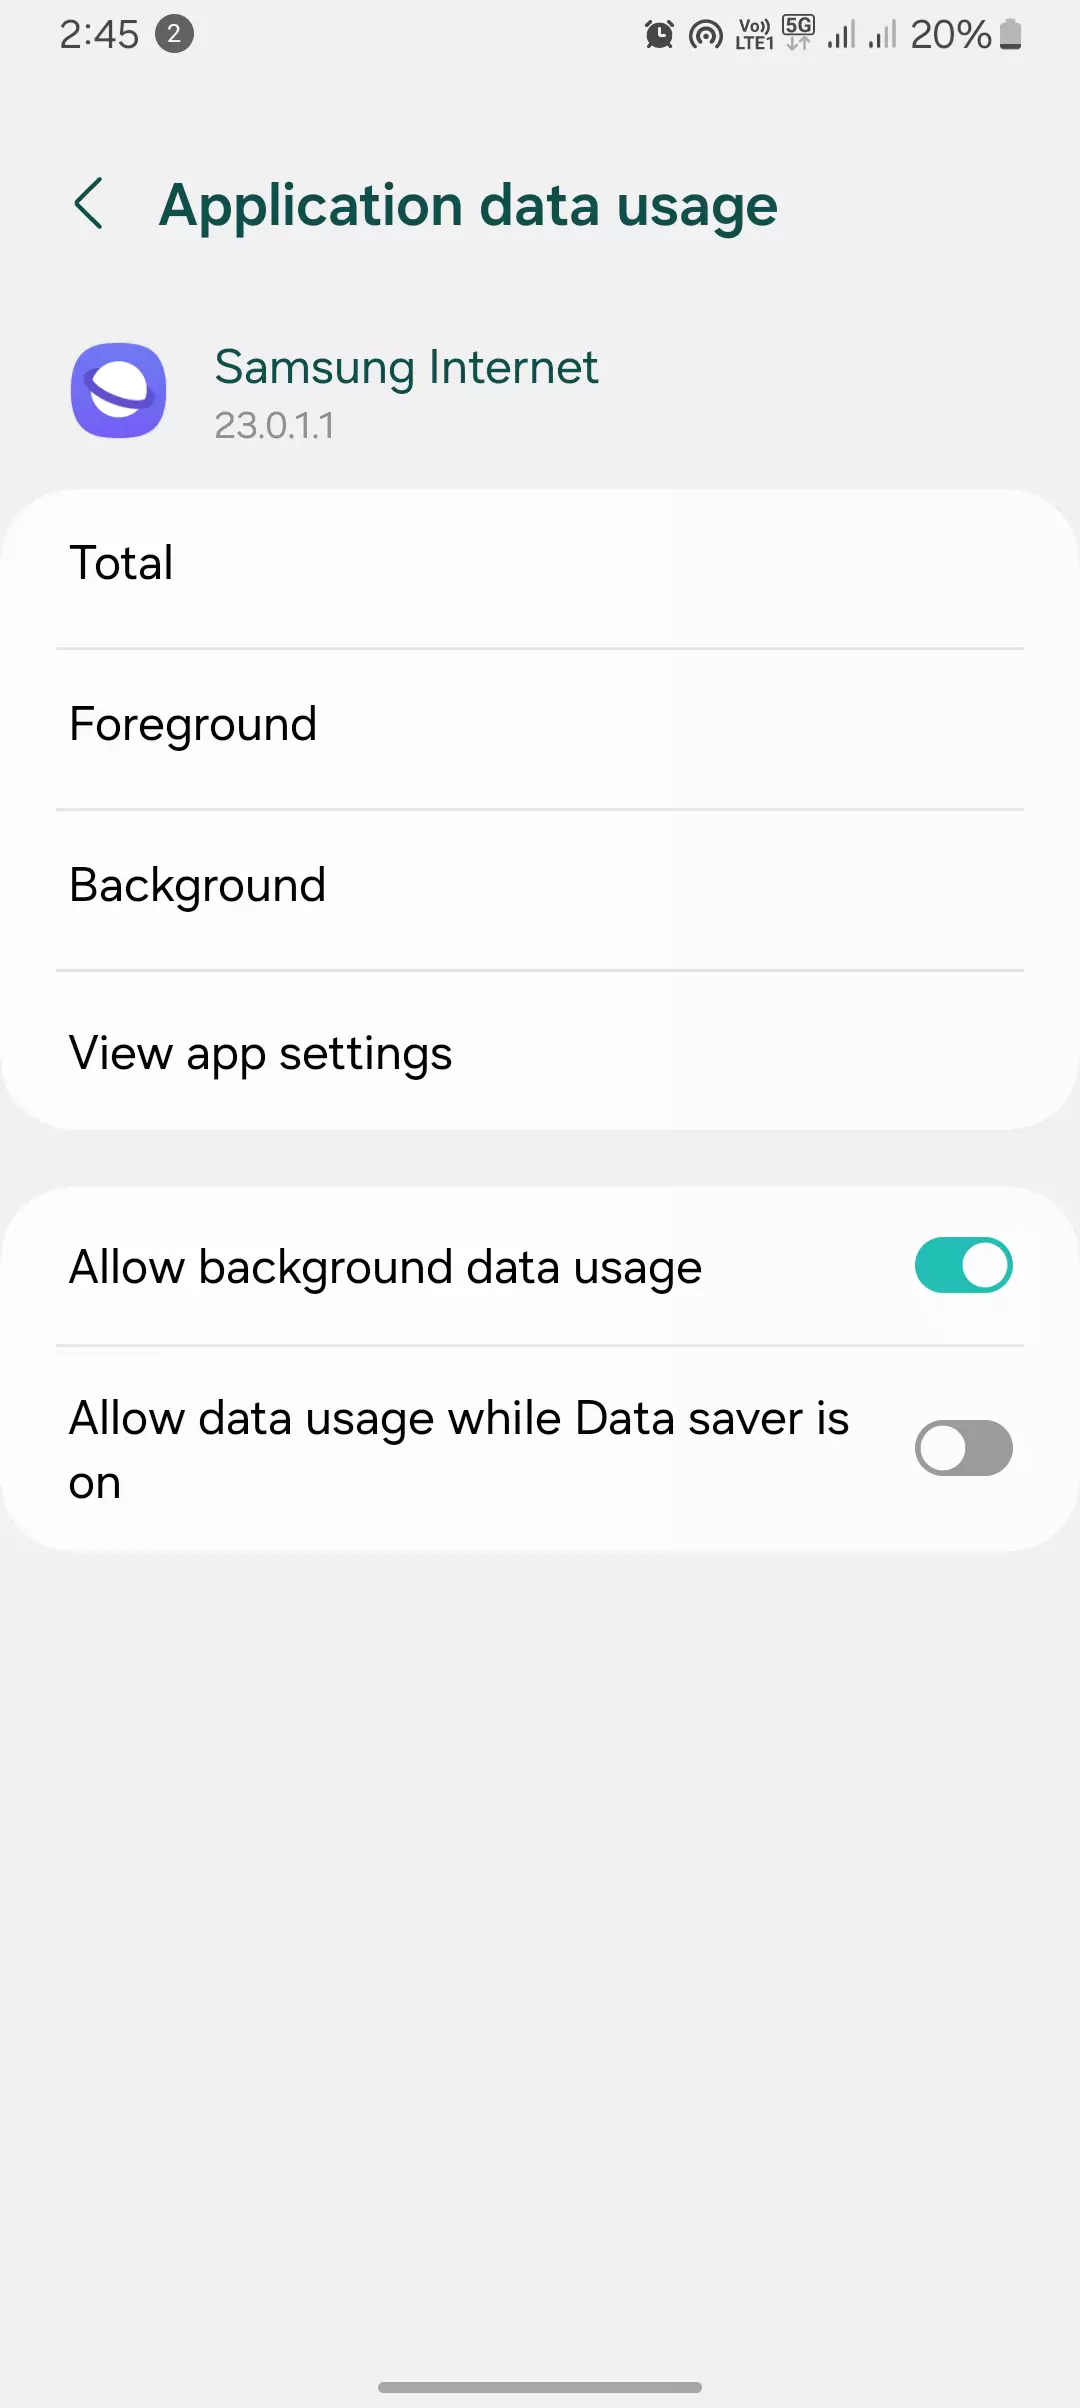 allow background data usage is turned on for samsung internet screenshot